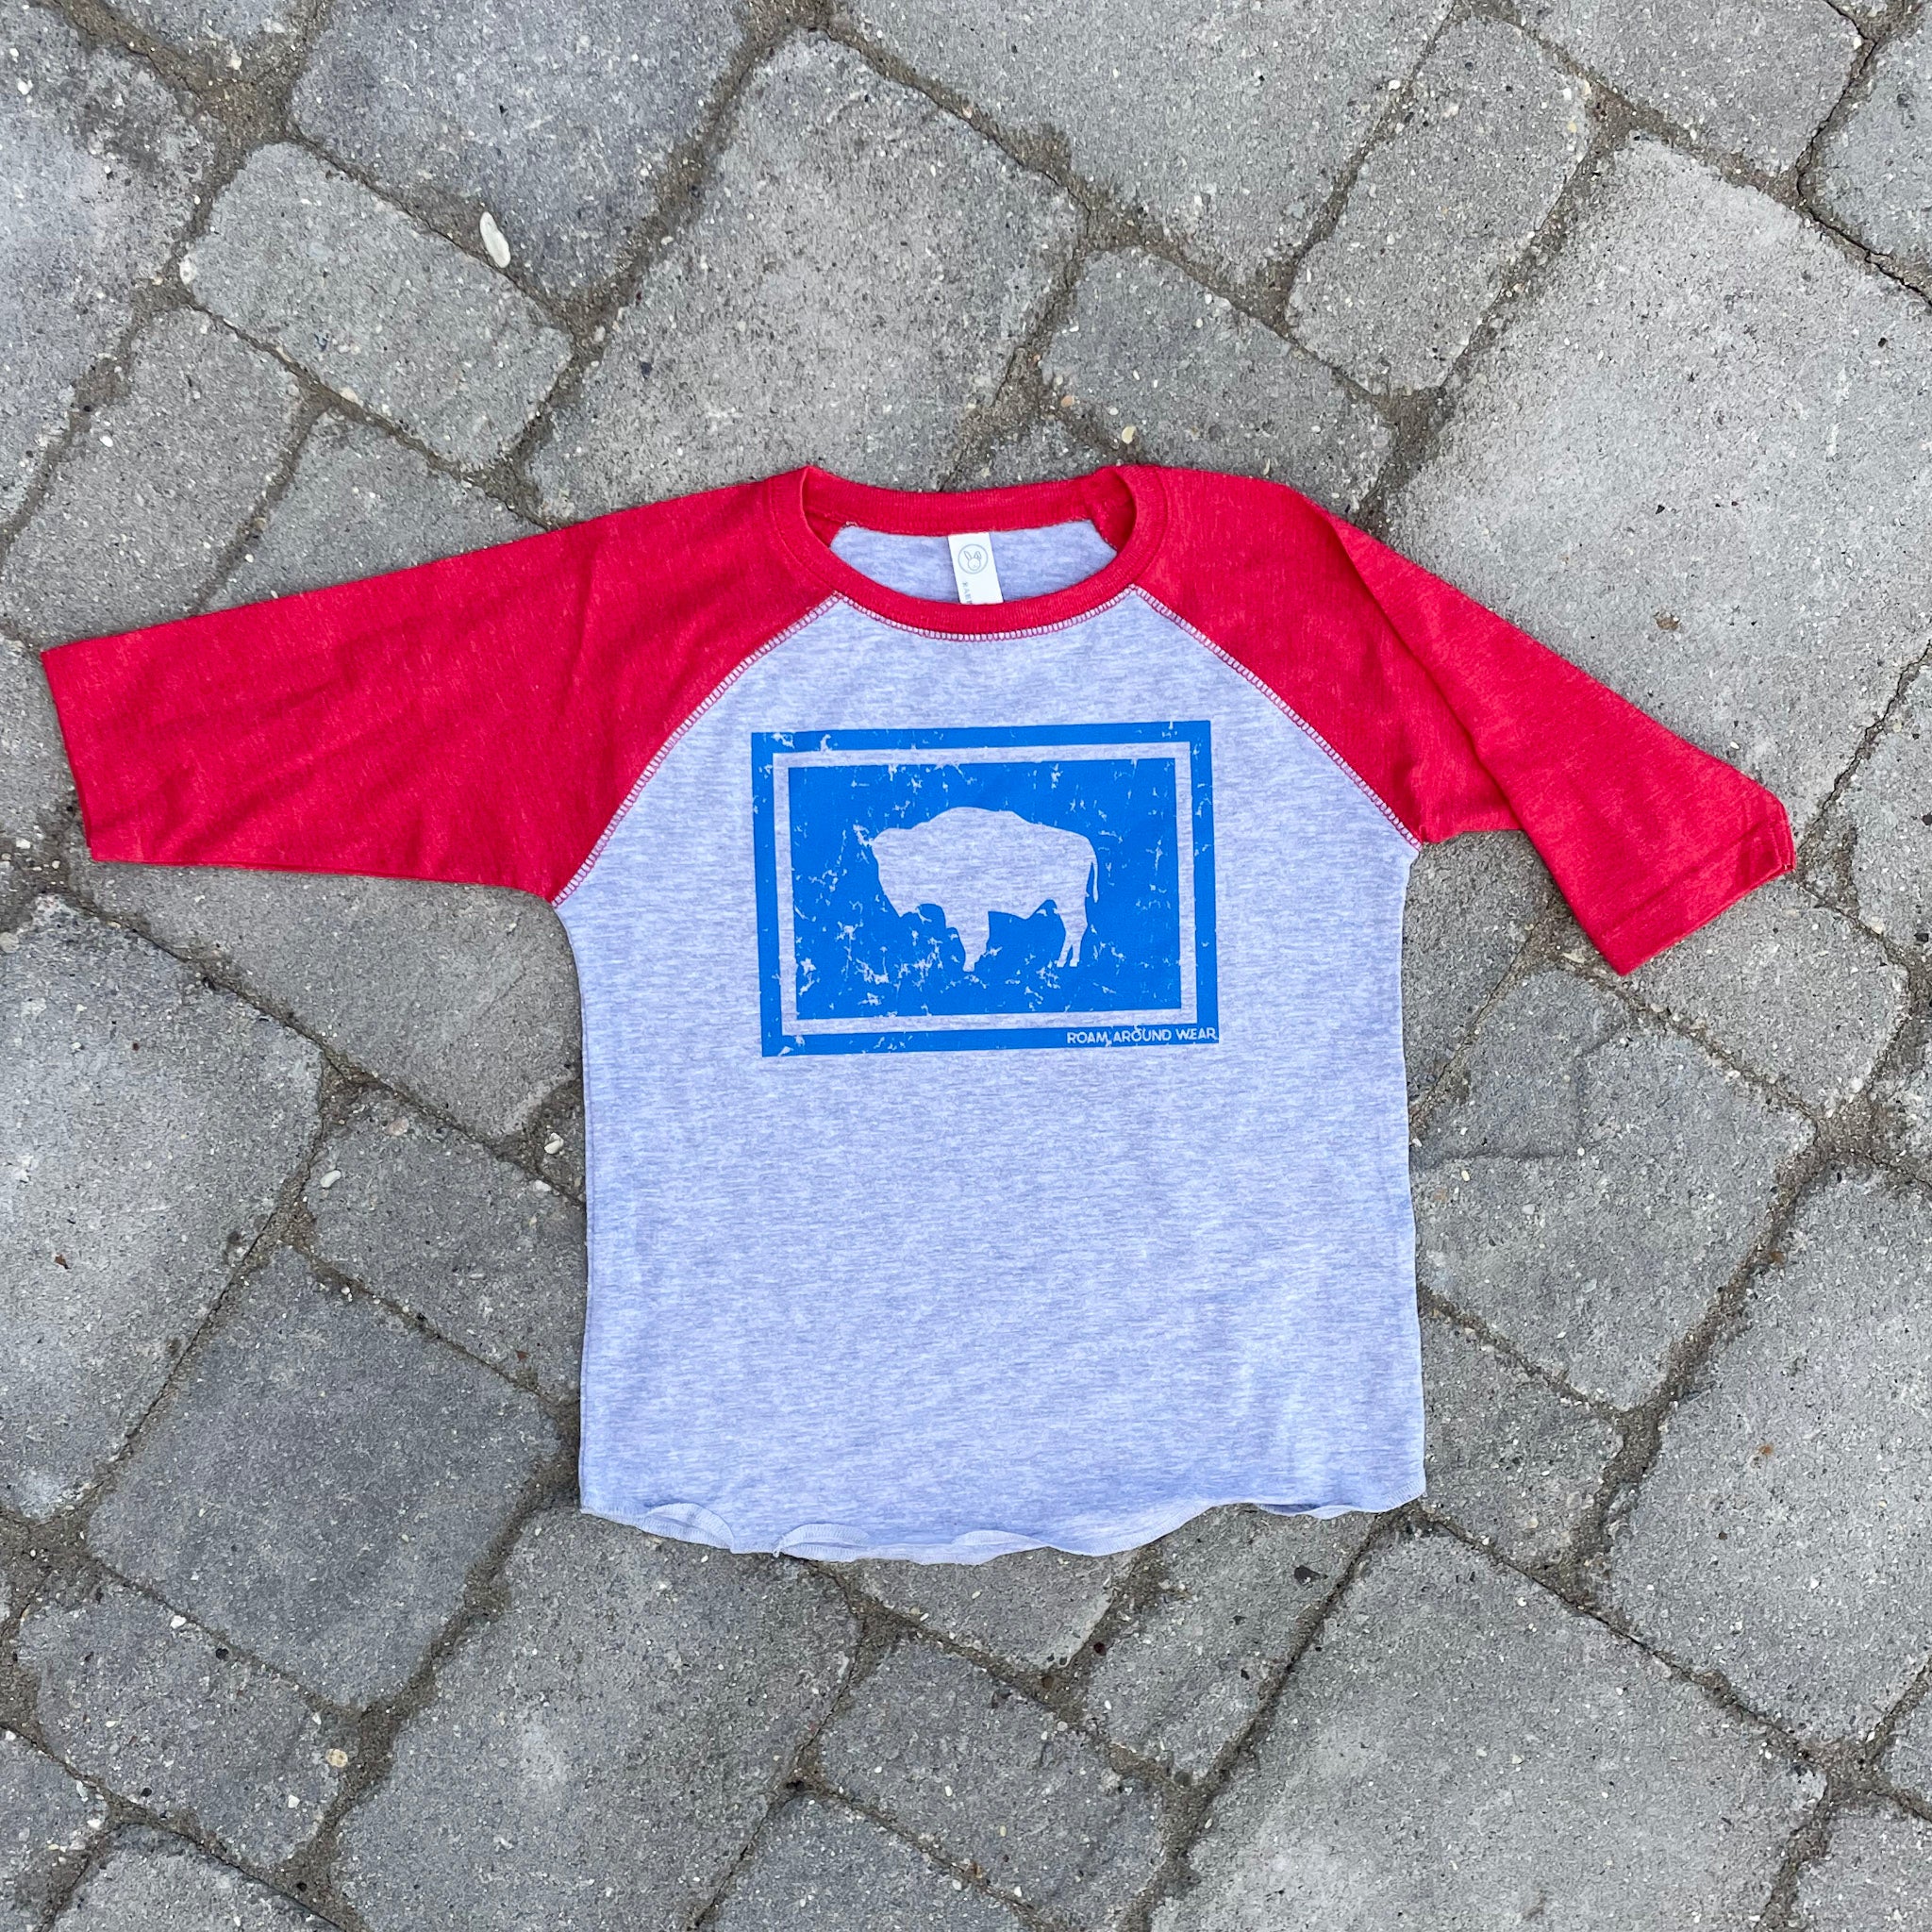 Wyoming flag toddler red, gray, blue tee. Roam Around Wear is a women owned Wyoming T-Shirt company based out of Gillette, Wyoming.